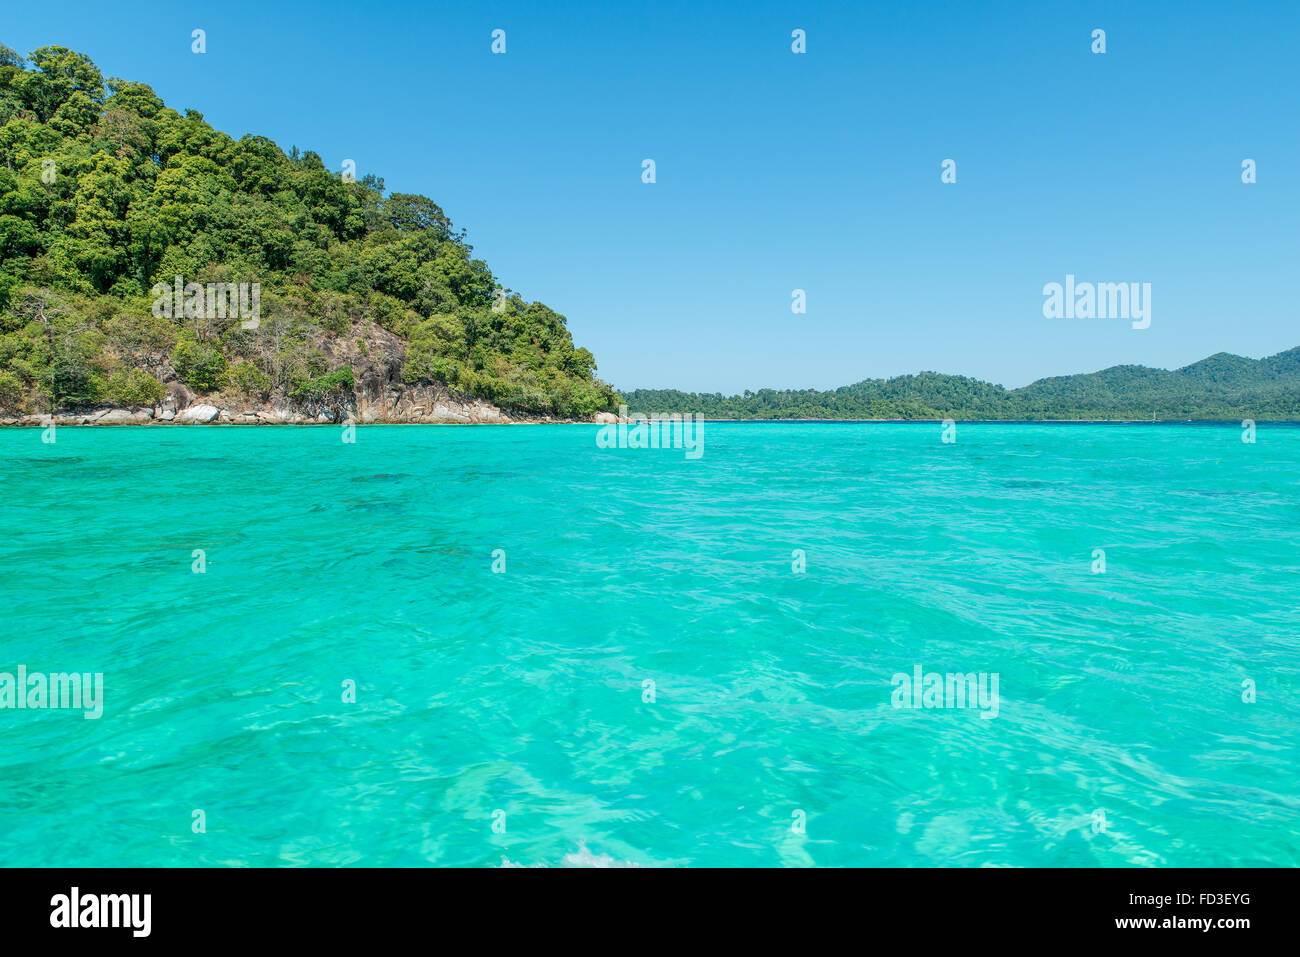 Summer, Travel, Vacation and Holiday concept - Idyllic Island Tranquil Bay in Phuket, Thailand Stock Photo